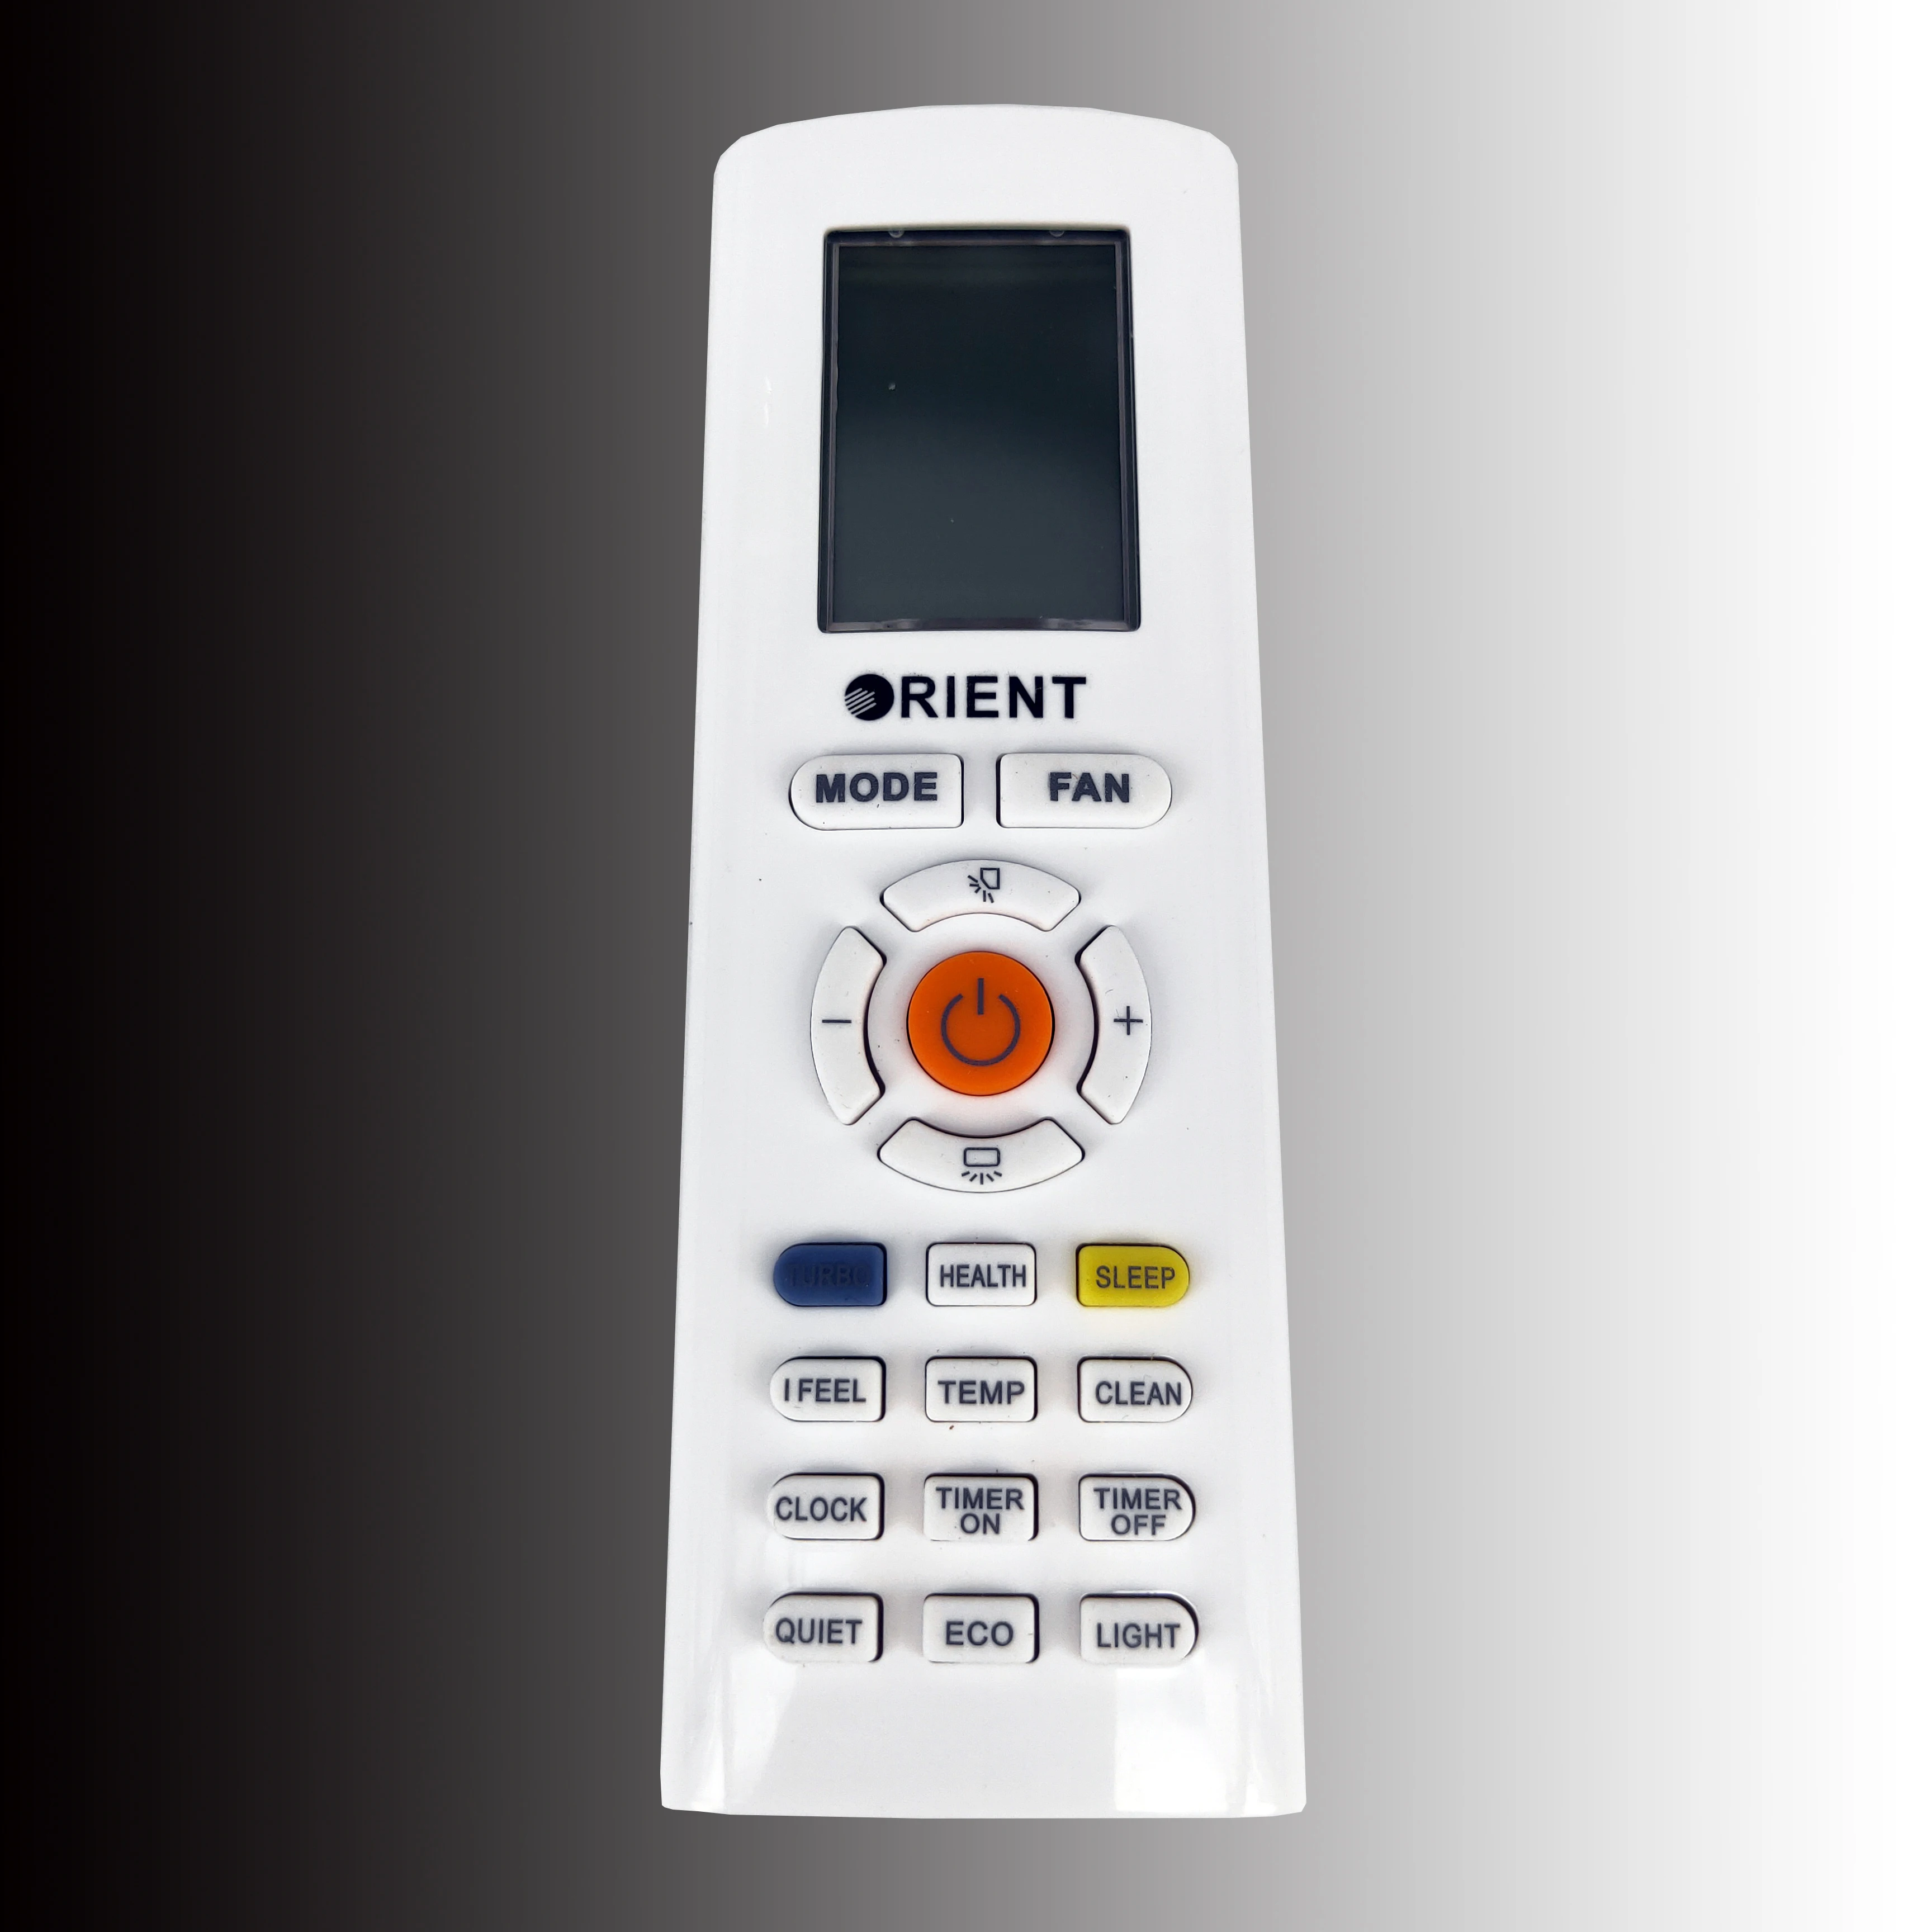 

NEW RA1A Replacement for Skyworth Rient air conditioner Remote control Fernbedienung